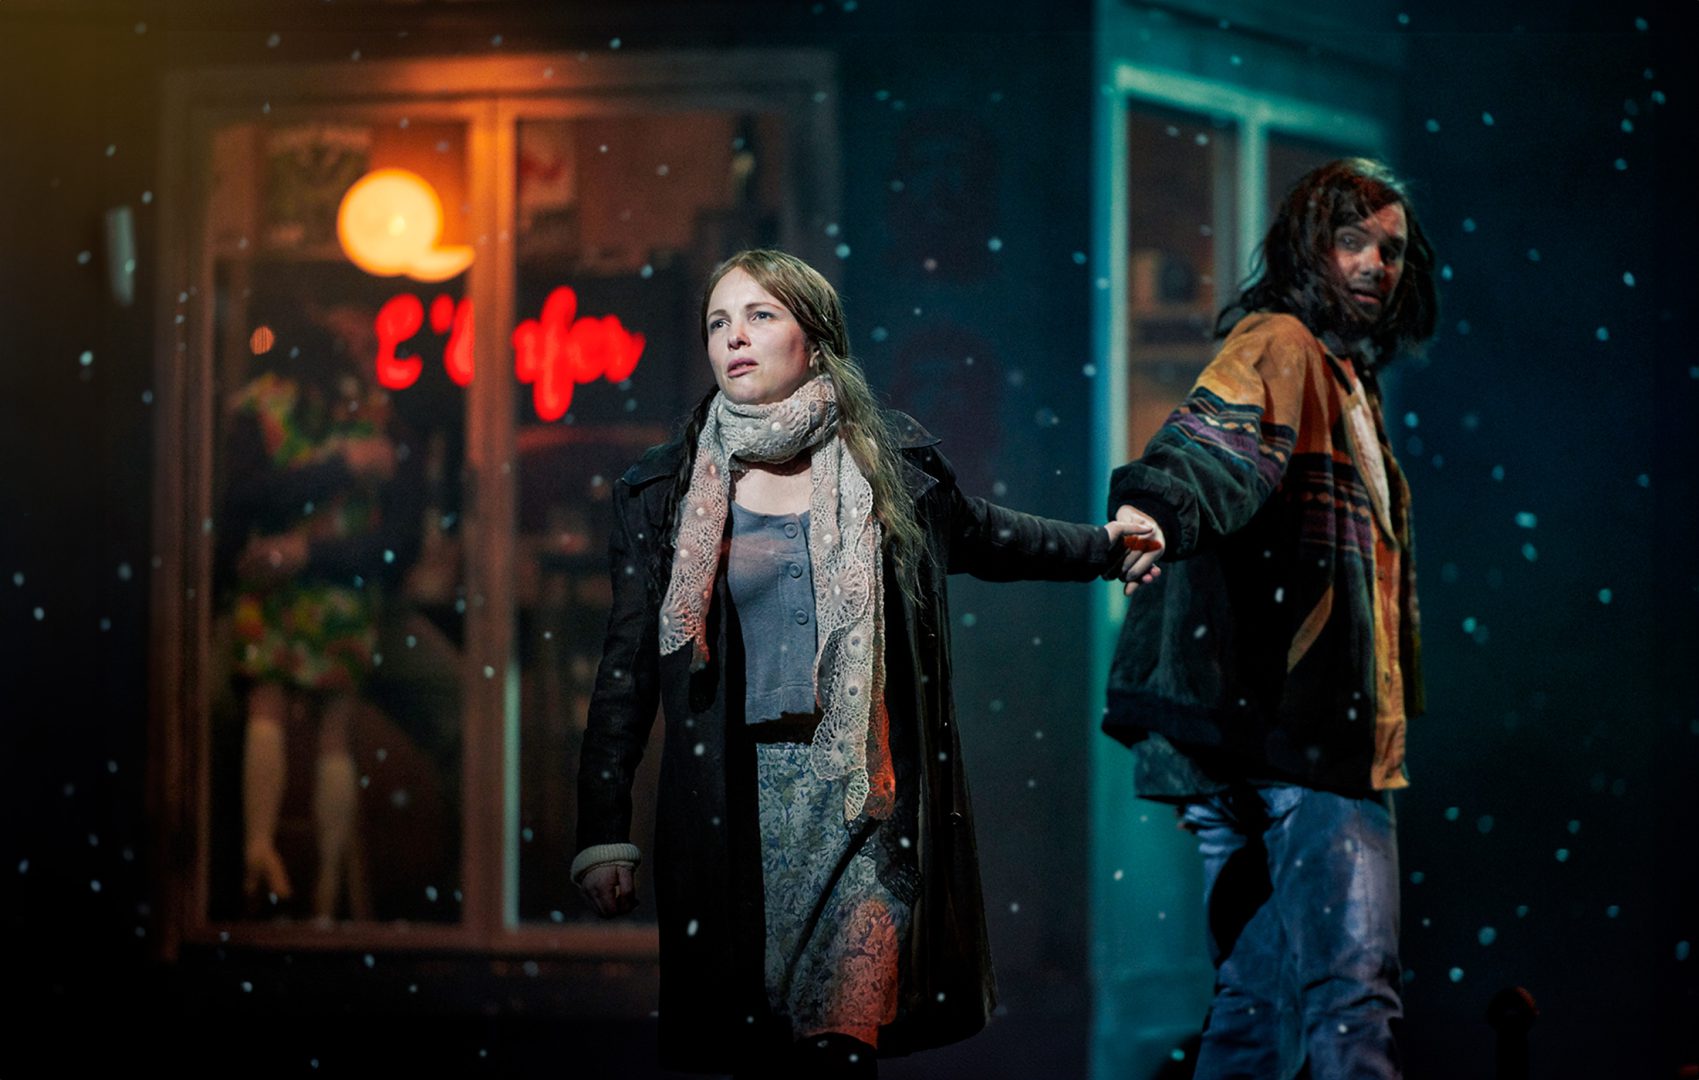 Two people walking outdoors at night, holding each other's hands. One person is wearing a scarf and a coat. The other person is dressed in a jacket with visible layers underneath, it's cold weather and snow is falling around them. In the background, a warmly lit window can be seen, displaying some decorations and the reflection of a red neon sign on a Café.